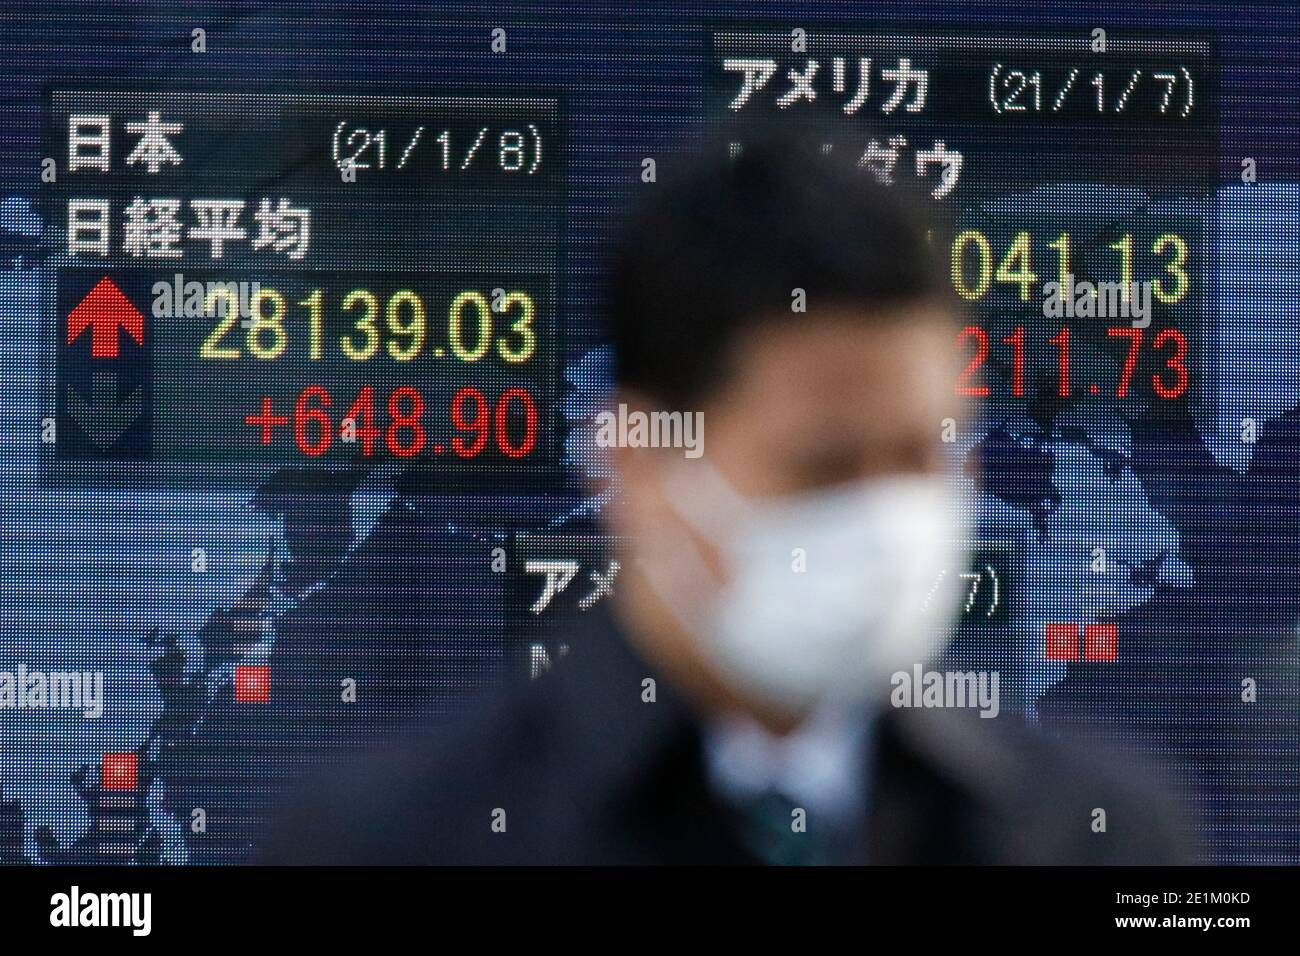 January 08, 2021, Tokyo, Japan - A man wearing a face mask walks past an electronic stock board showing Japan's Nikkei Stock Average, which rose 648.90 points or 2.36 percent to close at 28,139.03. Japan's Nikkei index rose 2.36% to hit a new 5-year high. Credit: Rodrigo Reyes Marin/Alamy Live News Stock Photo